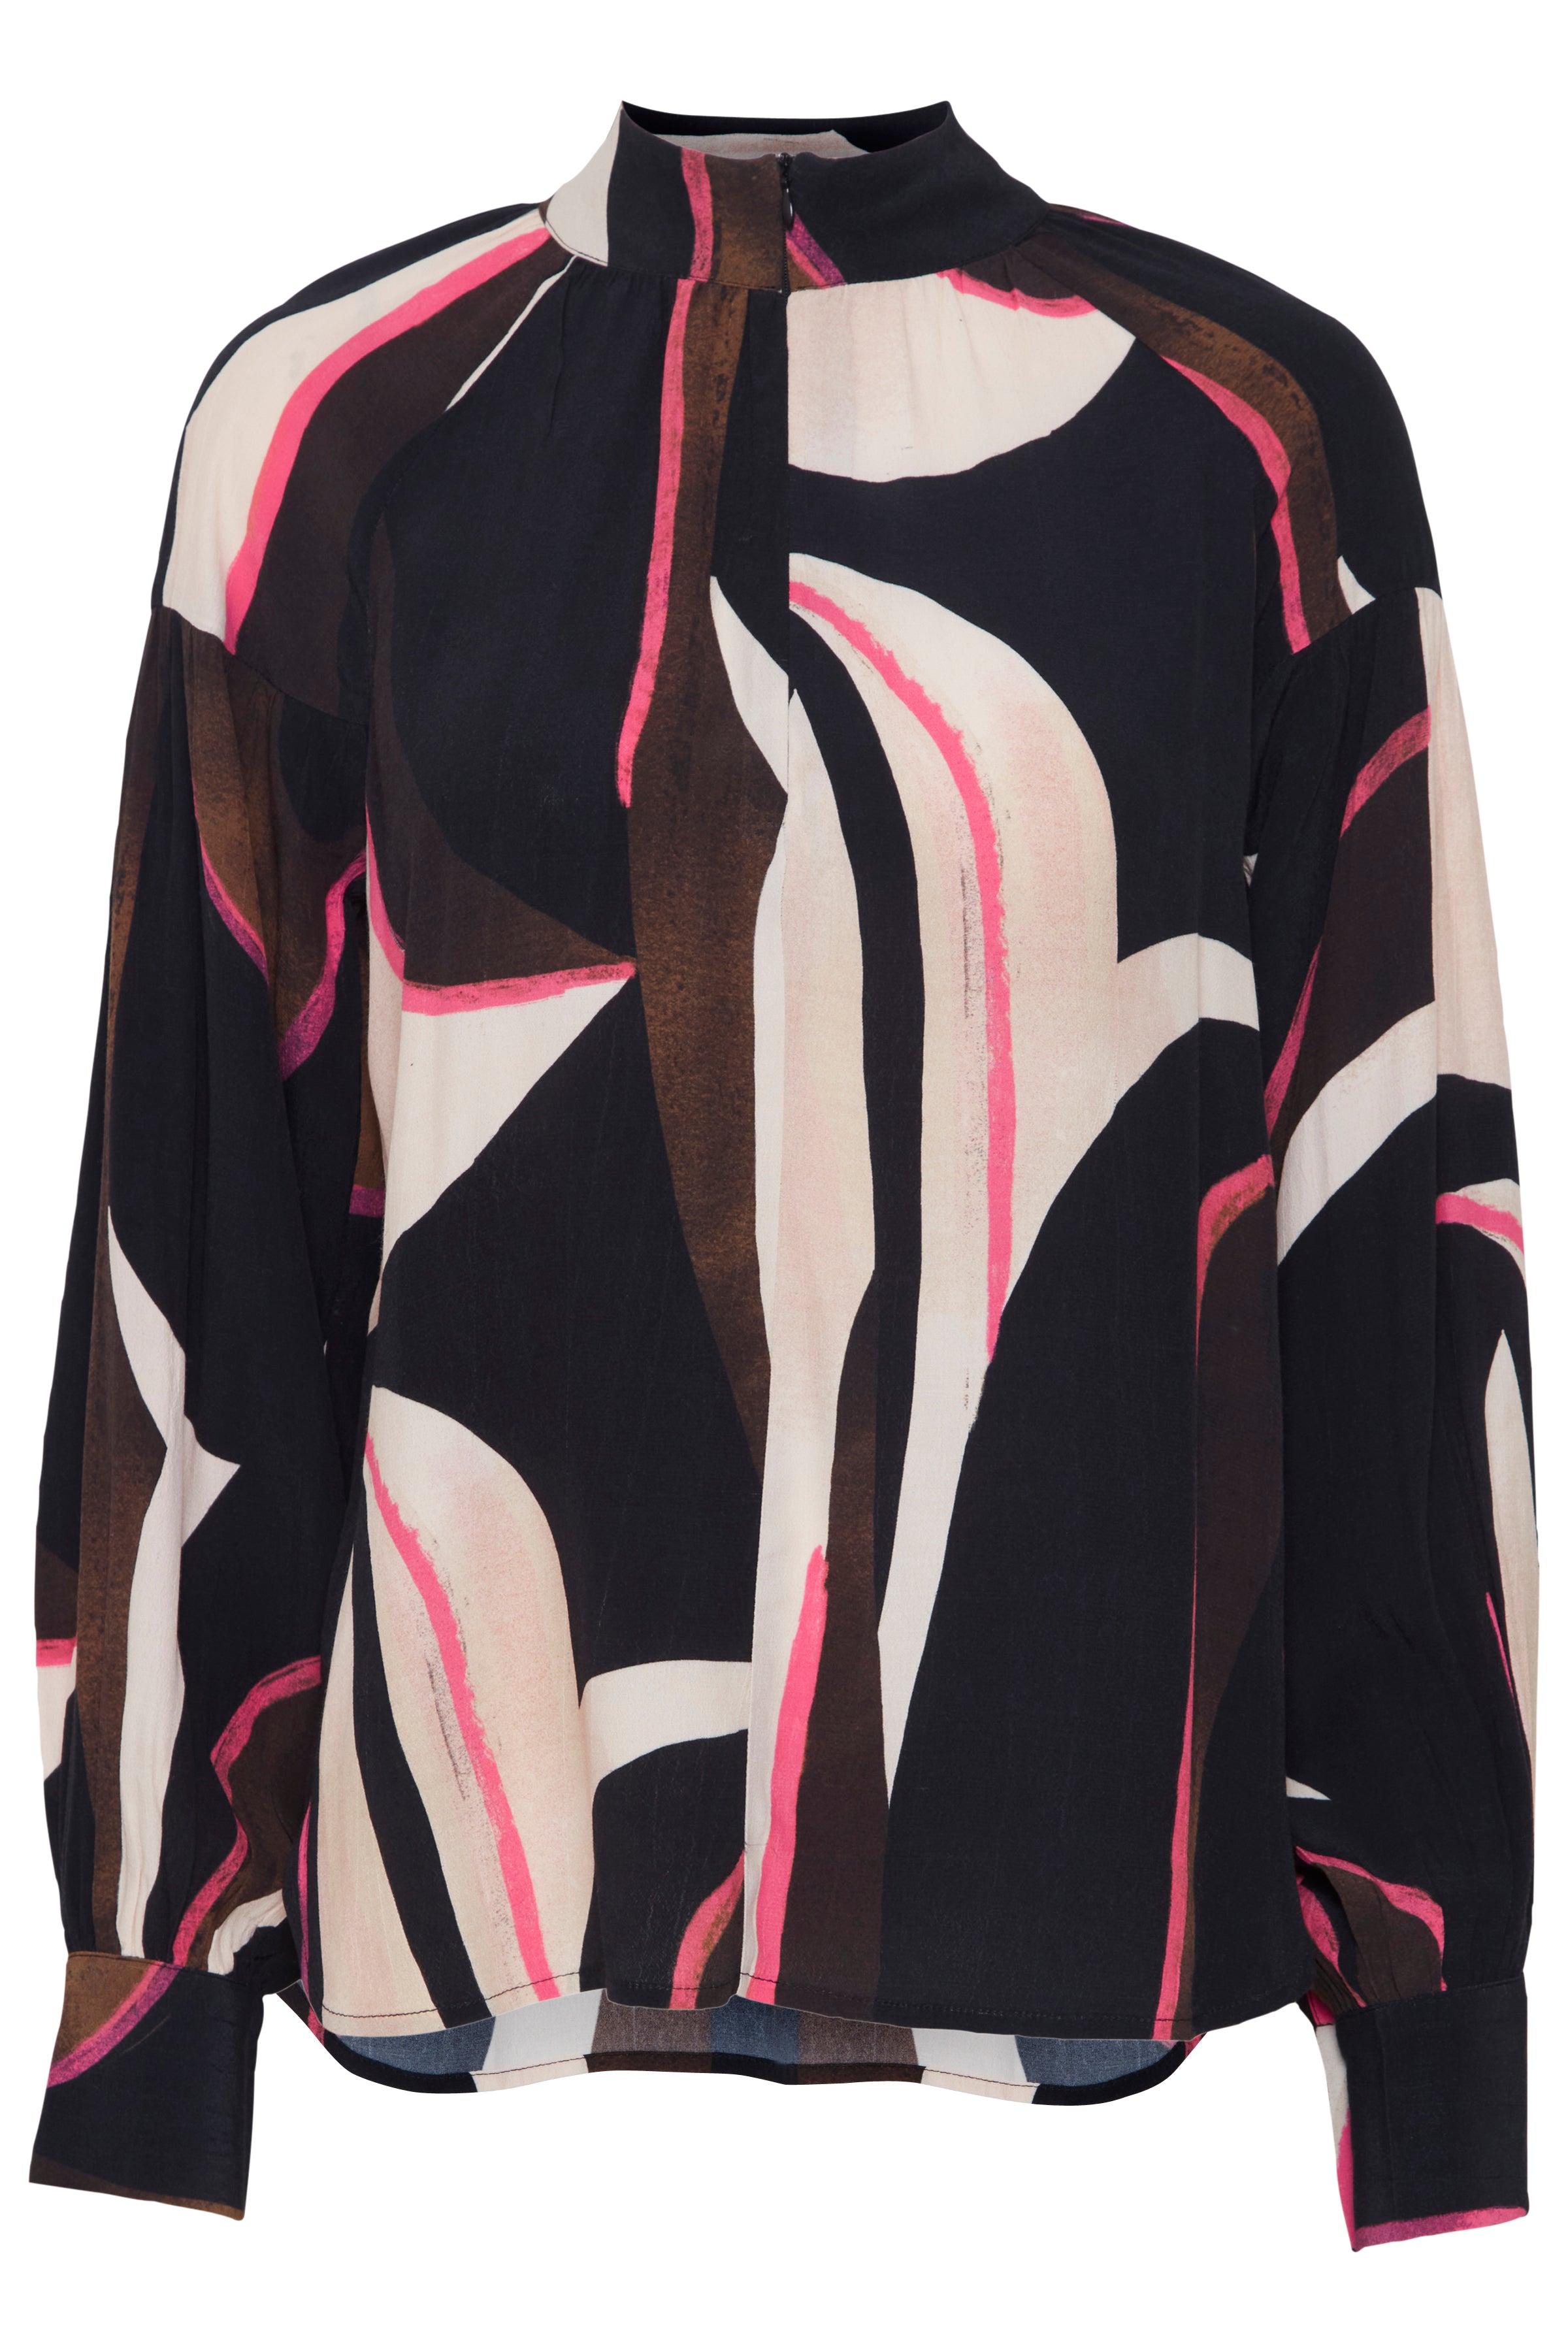 Fransa Frlena Navy Blazer/Pink 20613285 Blouse, Ruby Boutique – Abstract Printed 67